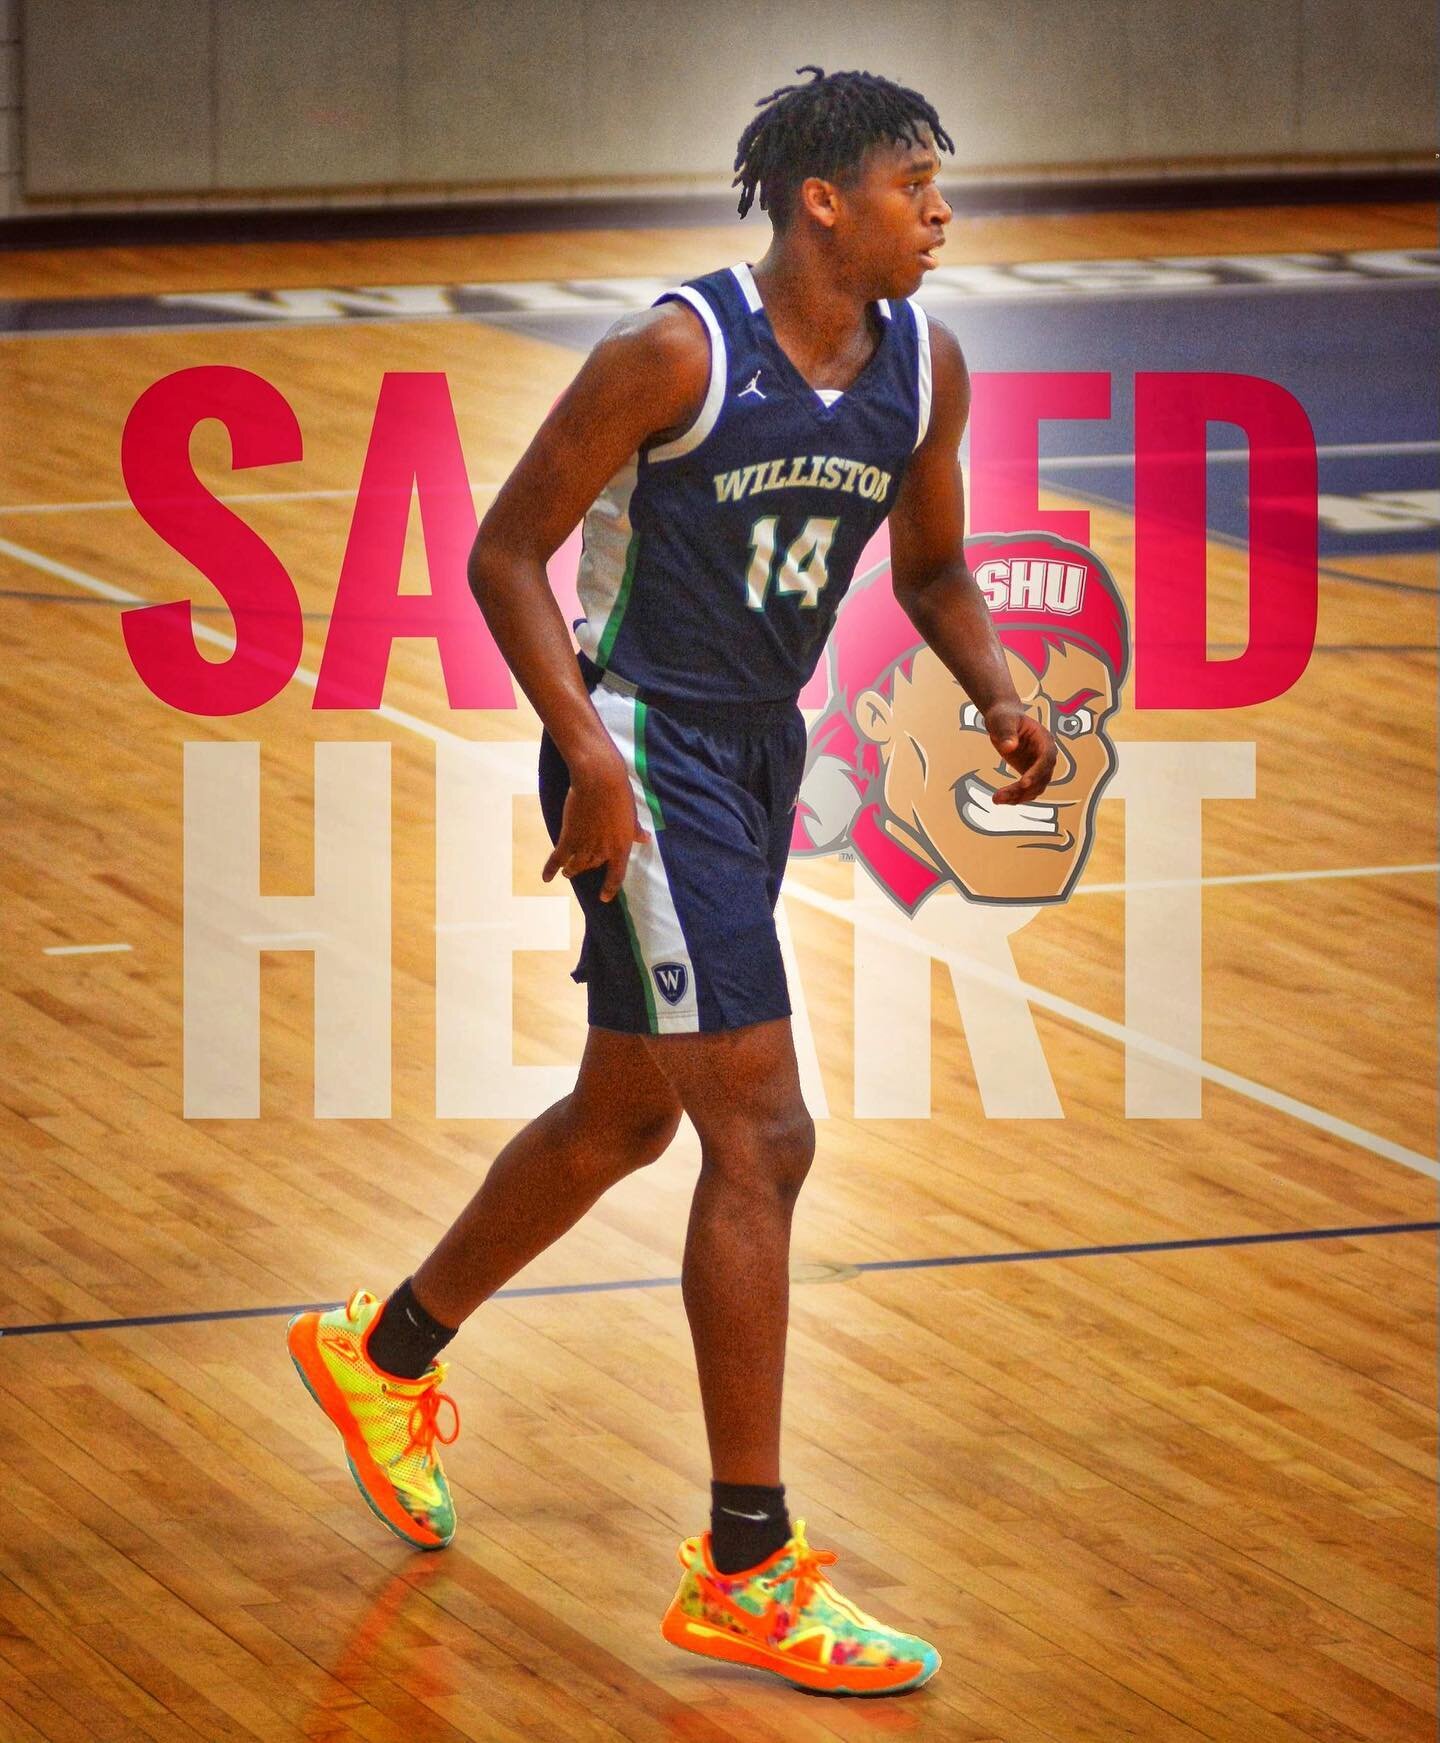 Congratulations to Williston and #PTTAlum Tanner Thomas on his commitment to Sacred Heart 🔴⚪️💪

#PTTHoops #ObsessProcess